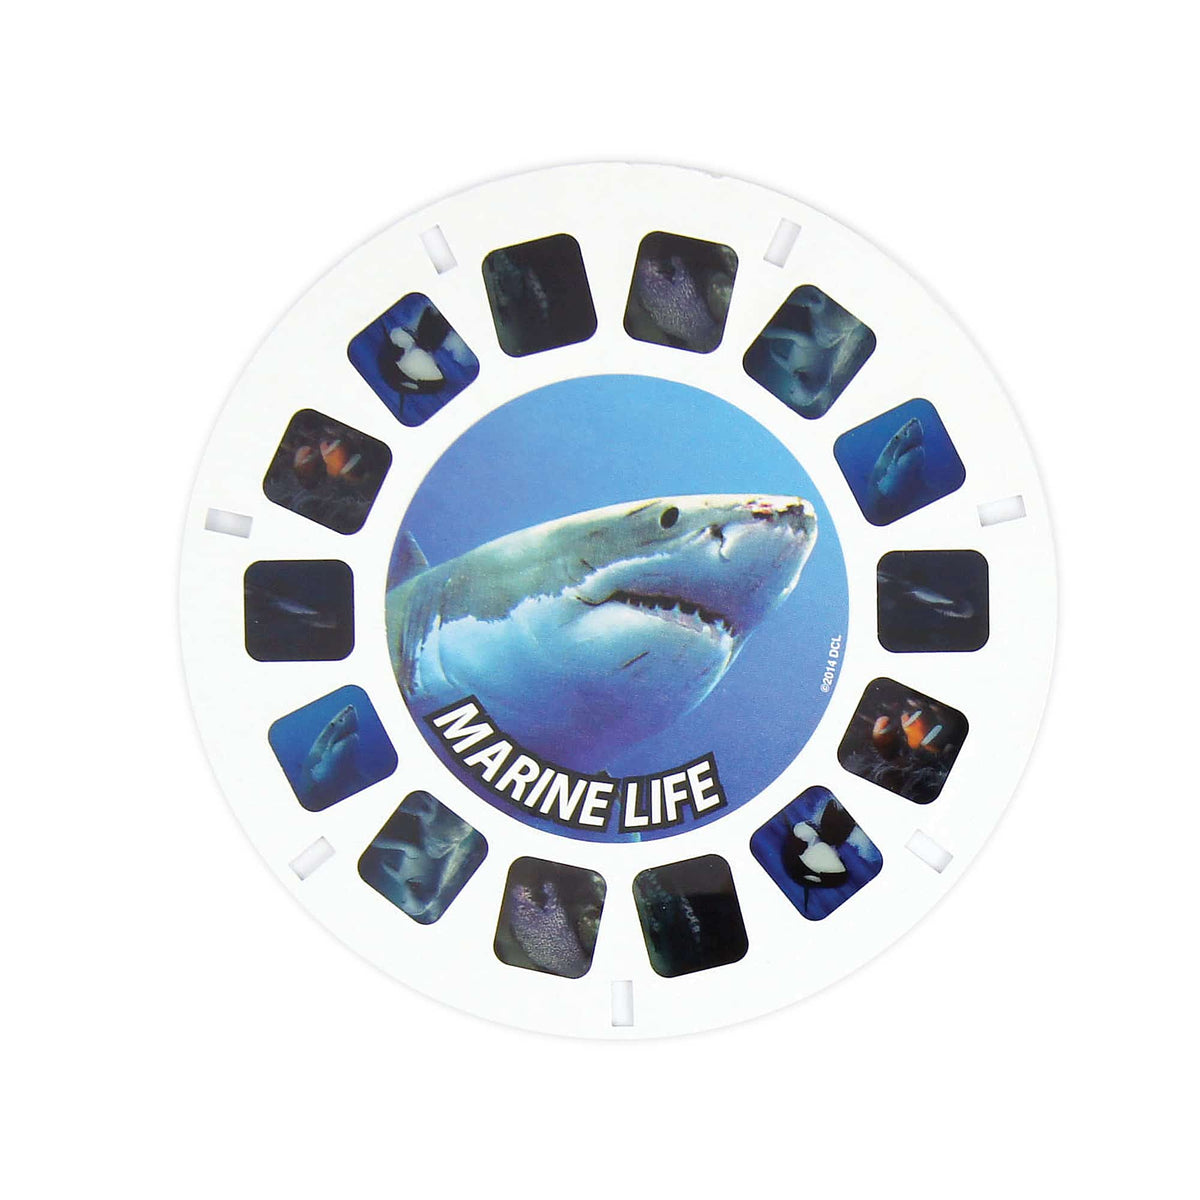 Viewmaster Reels - Discovery Kids Marine Life